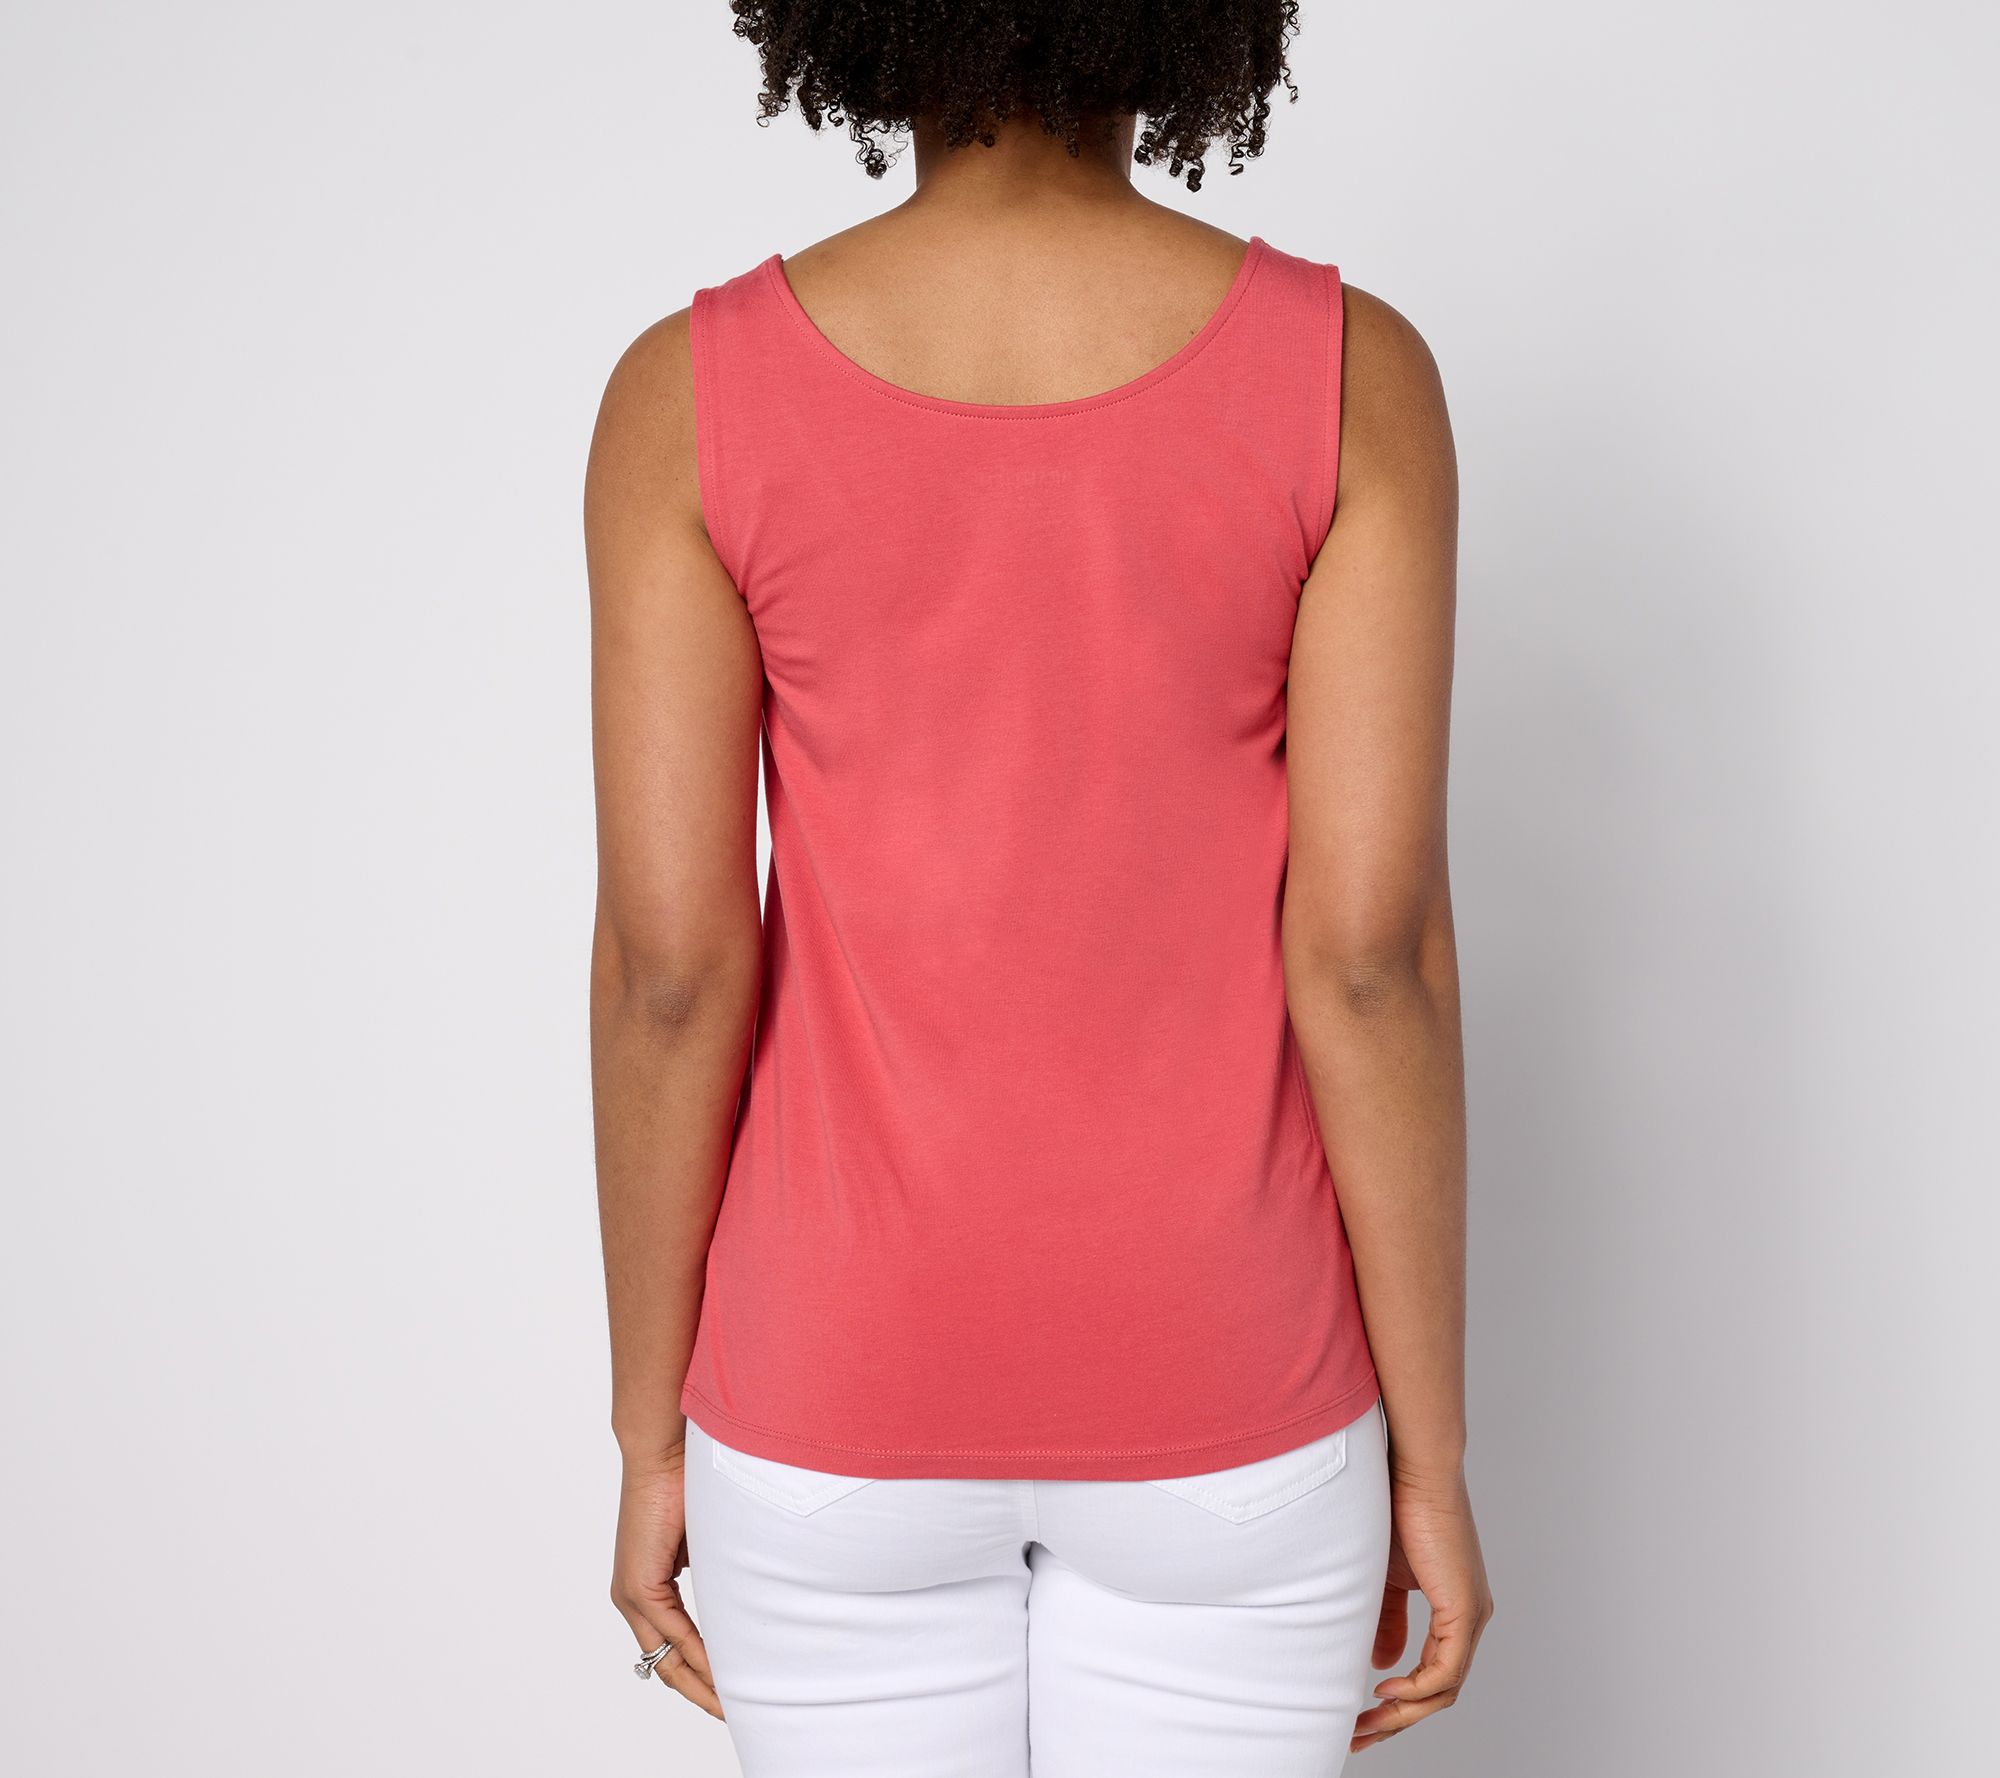  A Personal Touch Women's Plus Size Pink Round Scoop Neck Knit Tank  Top - 2X : Clothing, Shoes & Jewelry